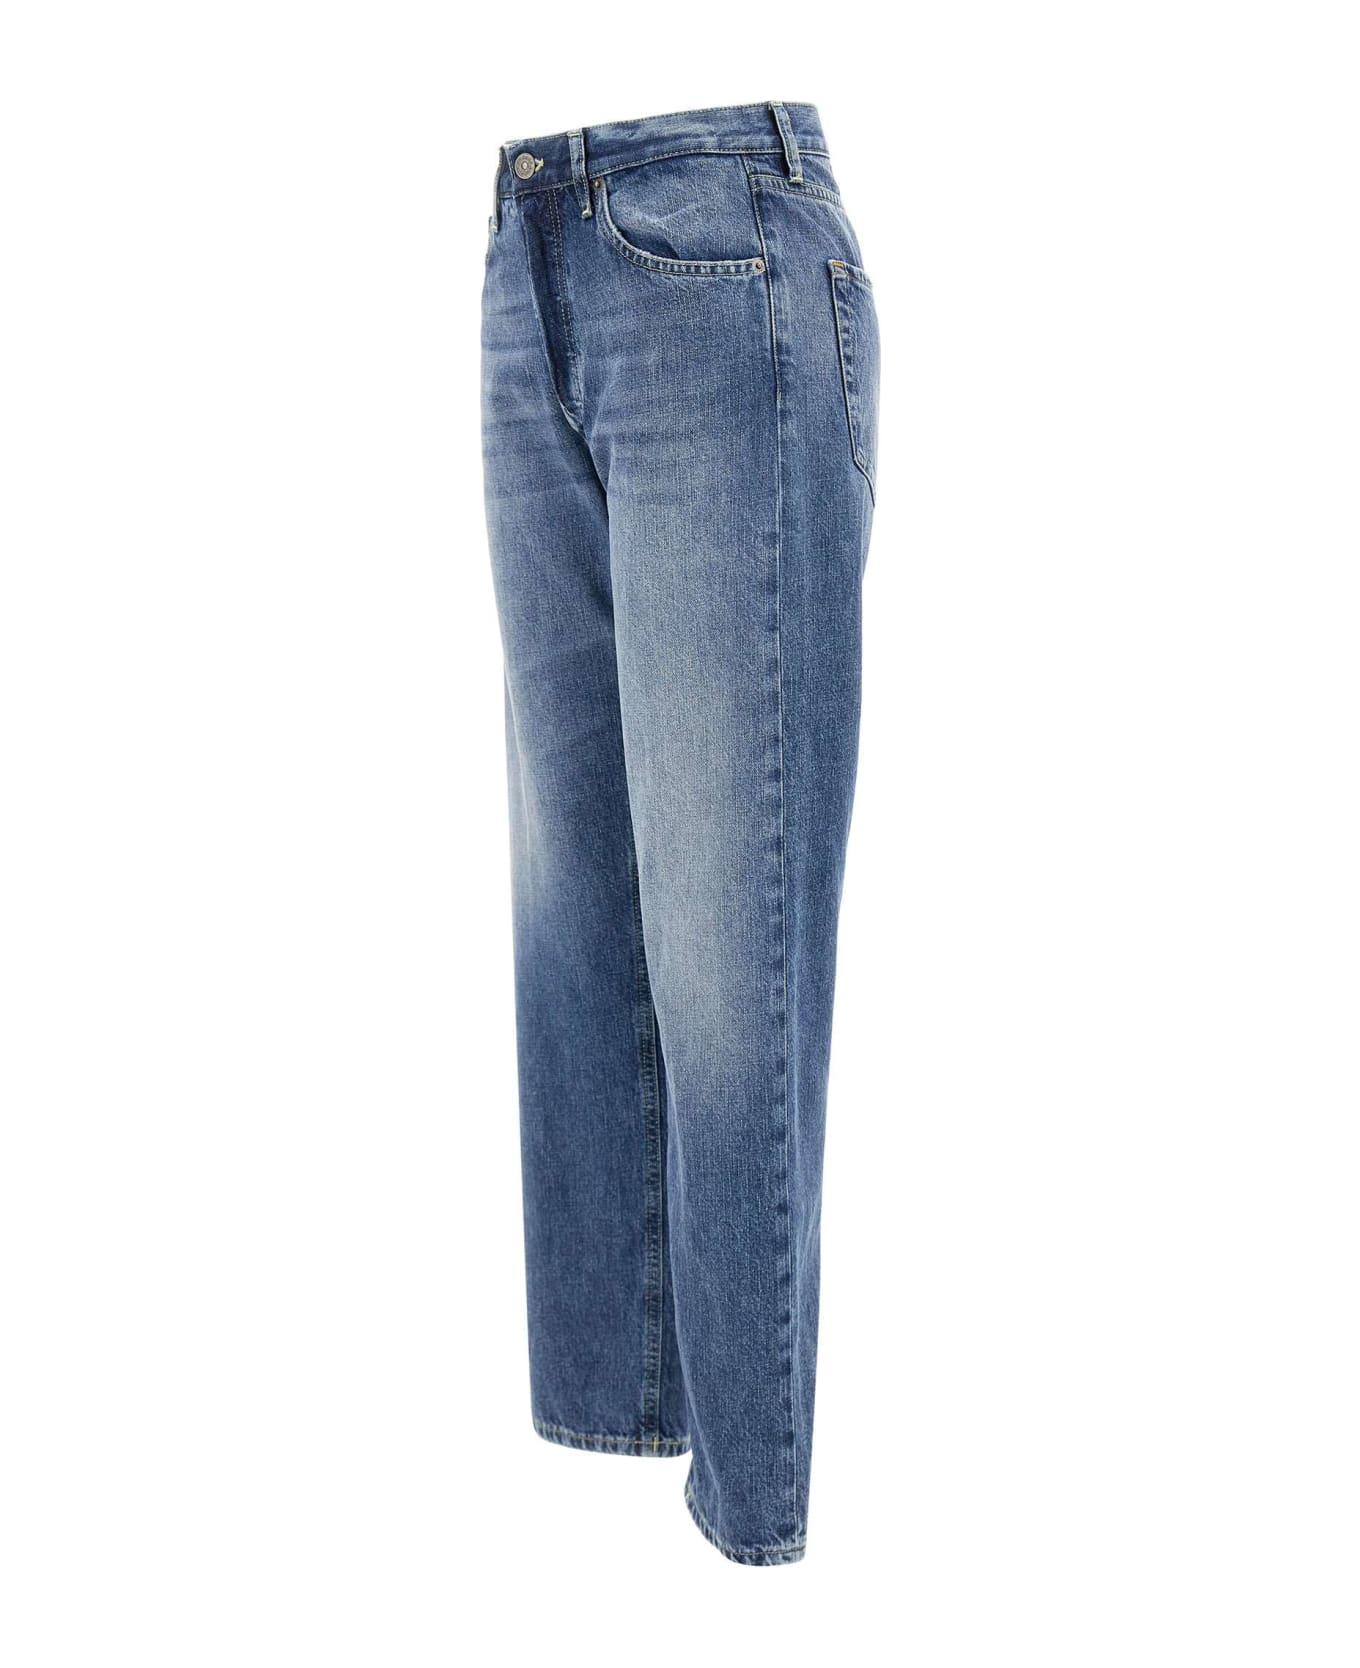 Dondup "icon" Jeans - BLUE